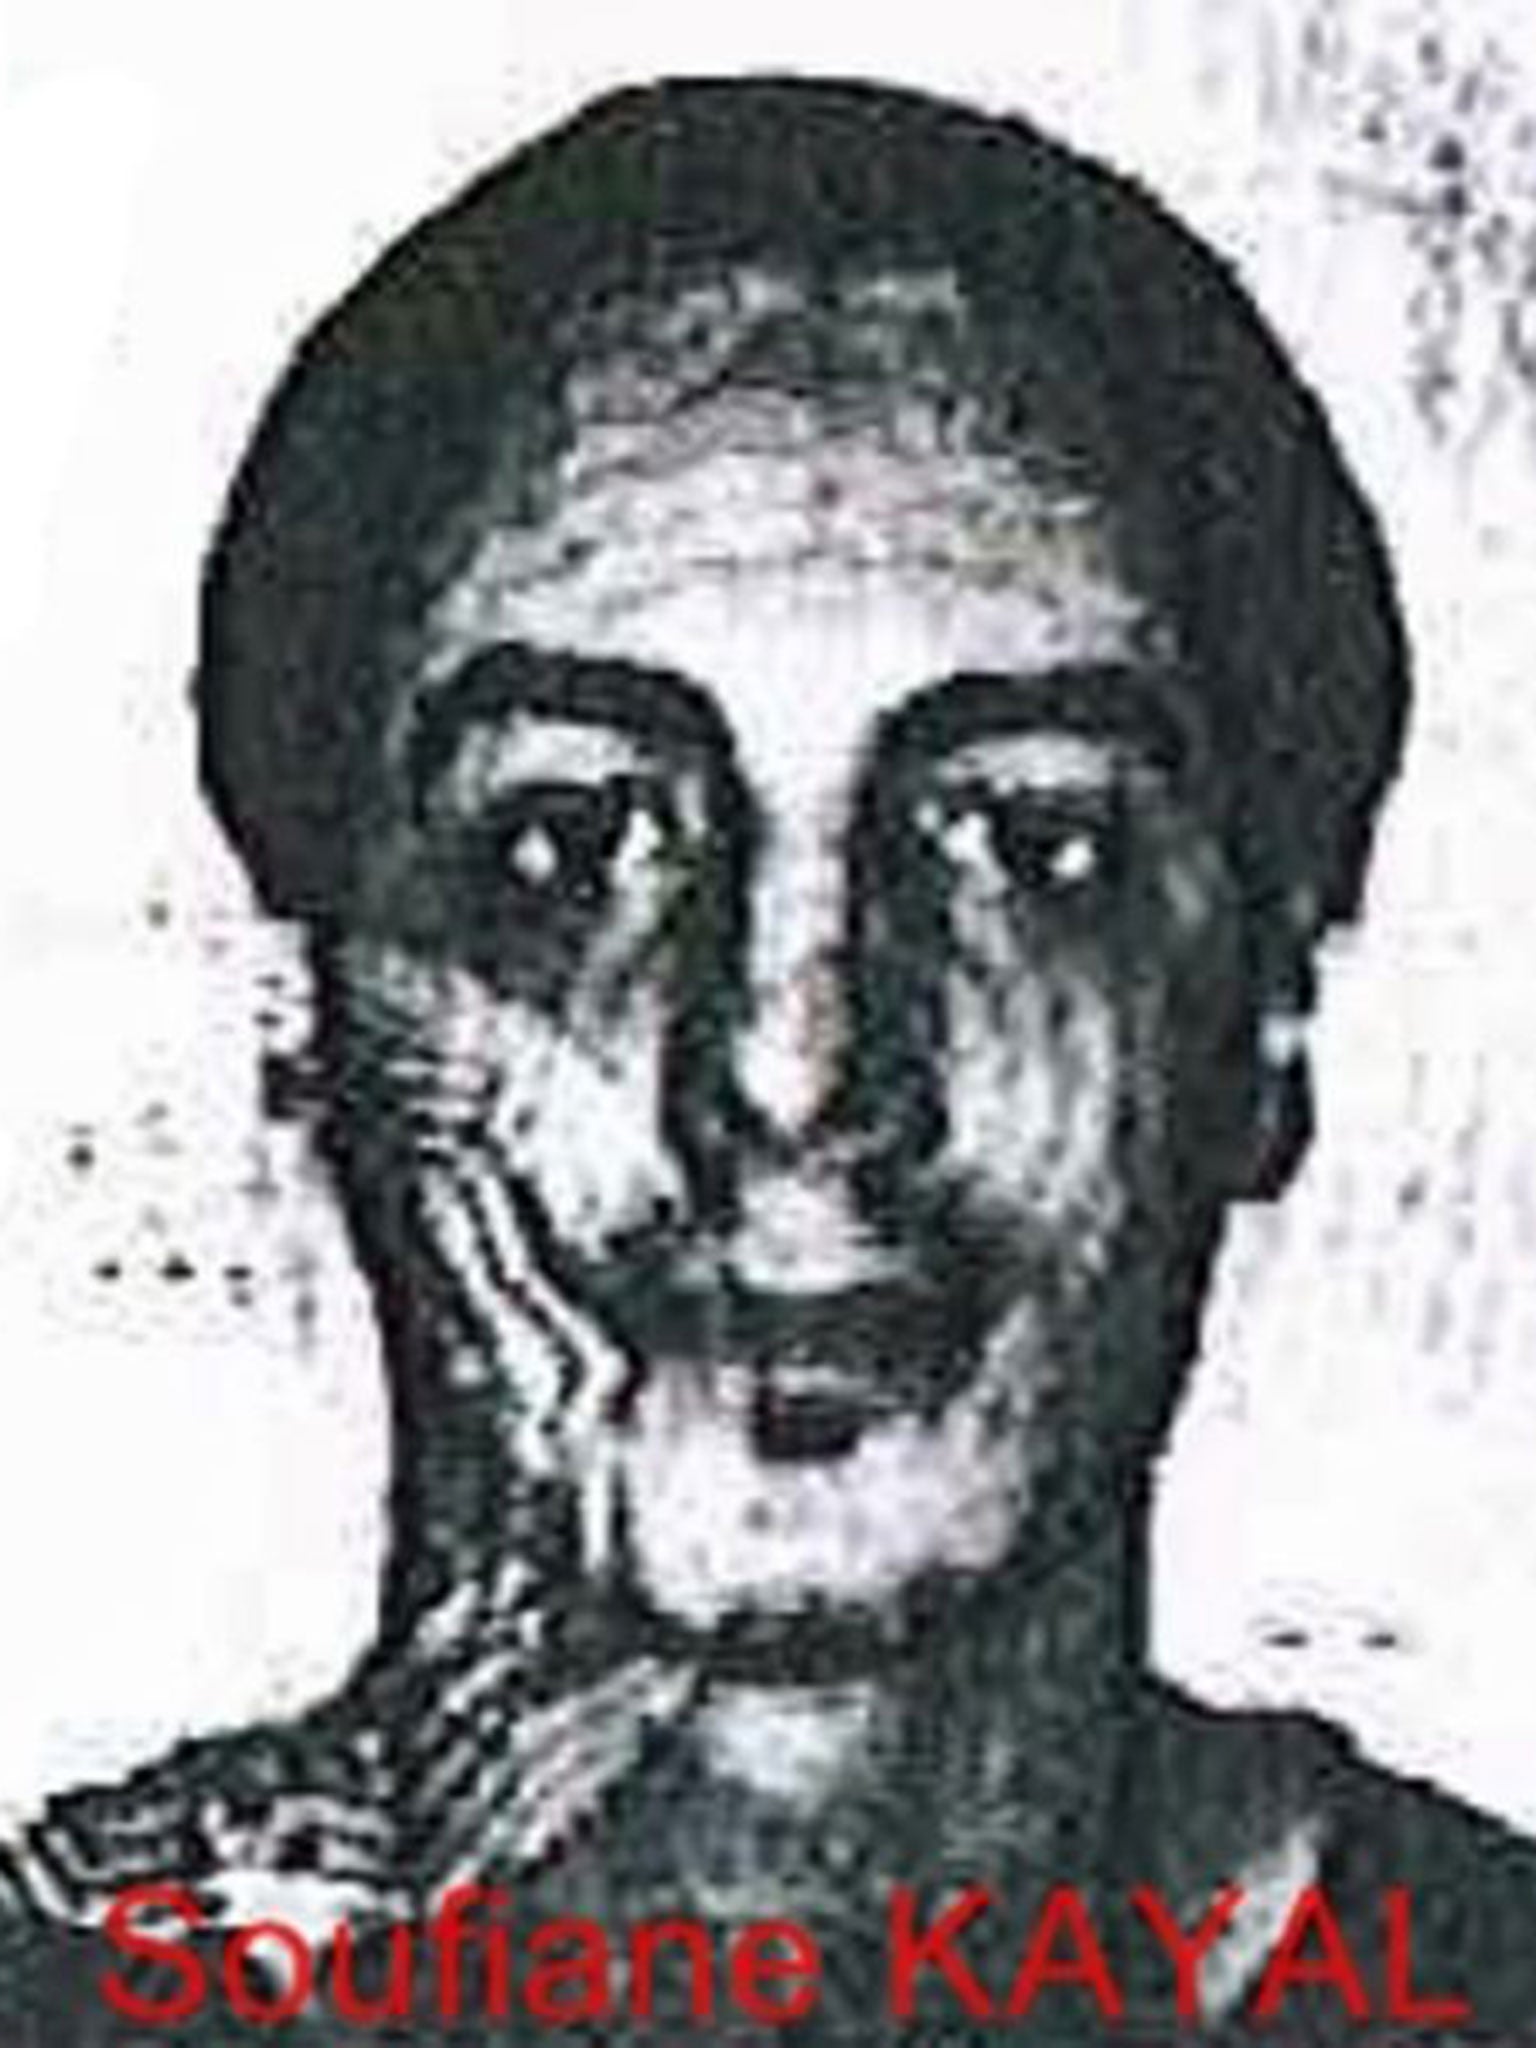 A photofit released by Belgium Federal Police shows Soufiane Kayal, the false identity of the suspect Najim Laachraoui